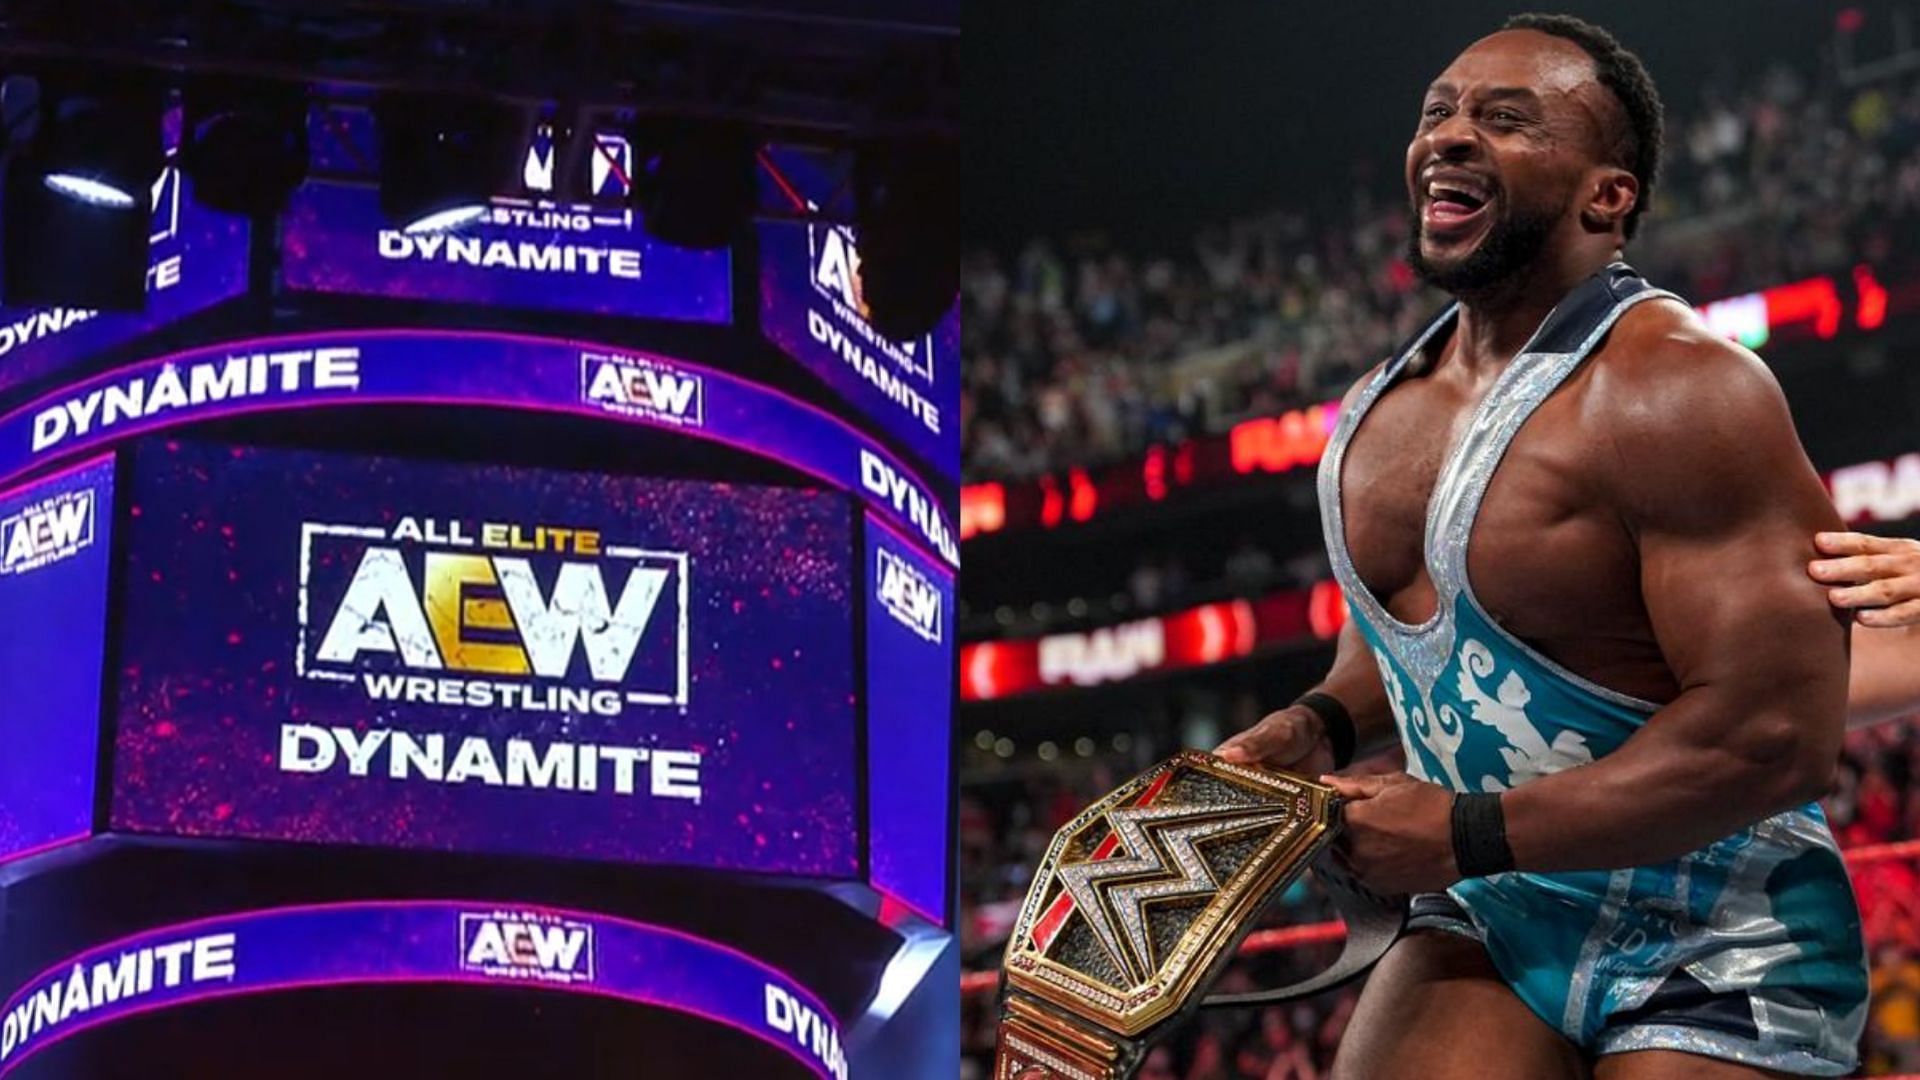 Big E was spotted alongside a top AEW star and champion